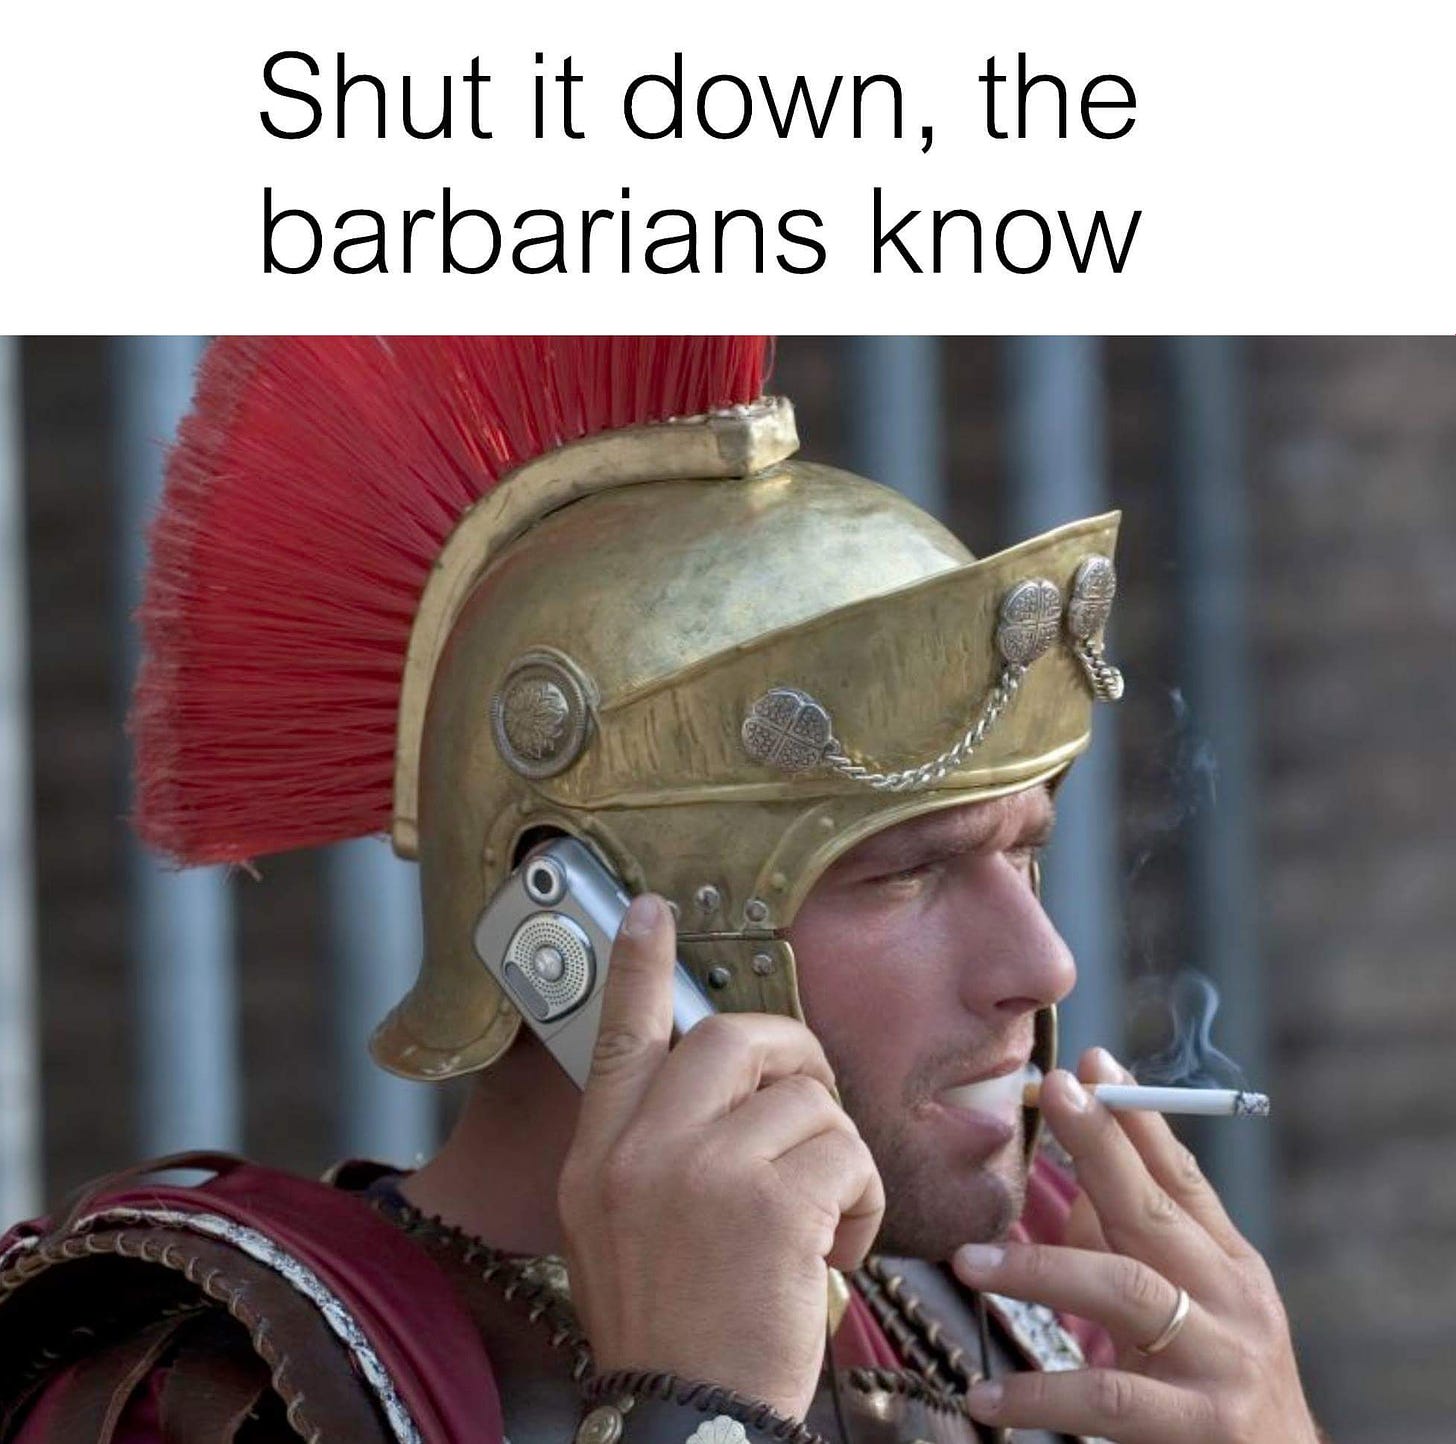 When you have to shut it down, because the barbarians know ...